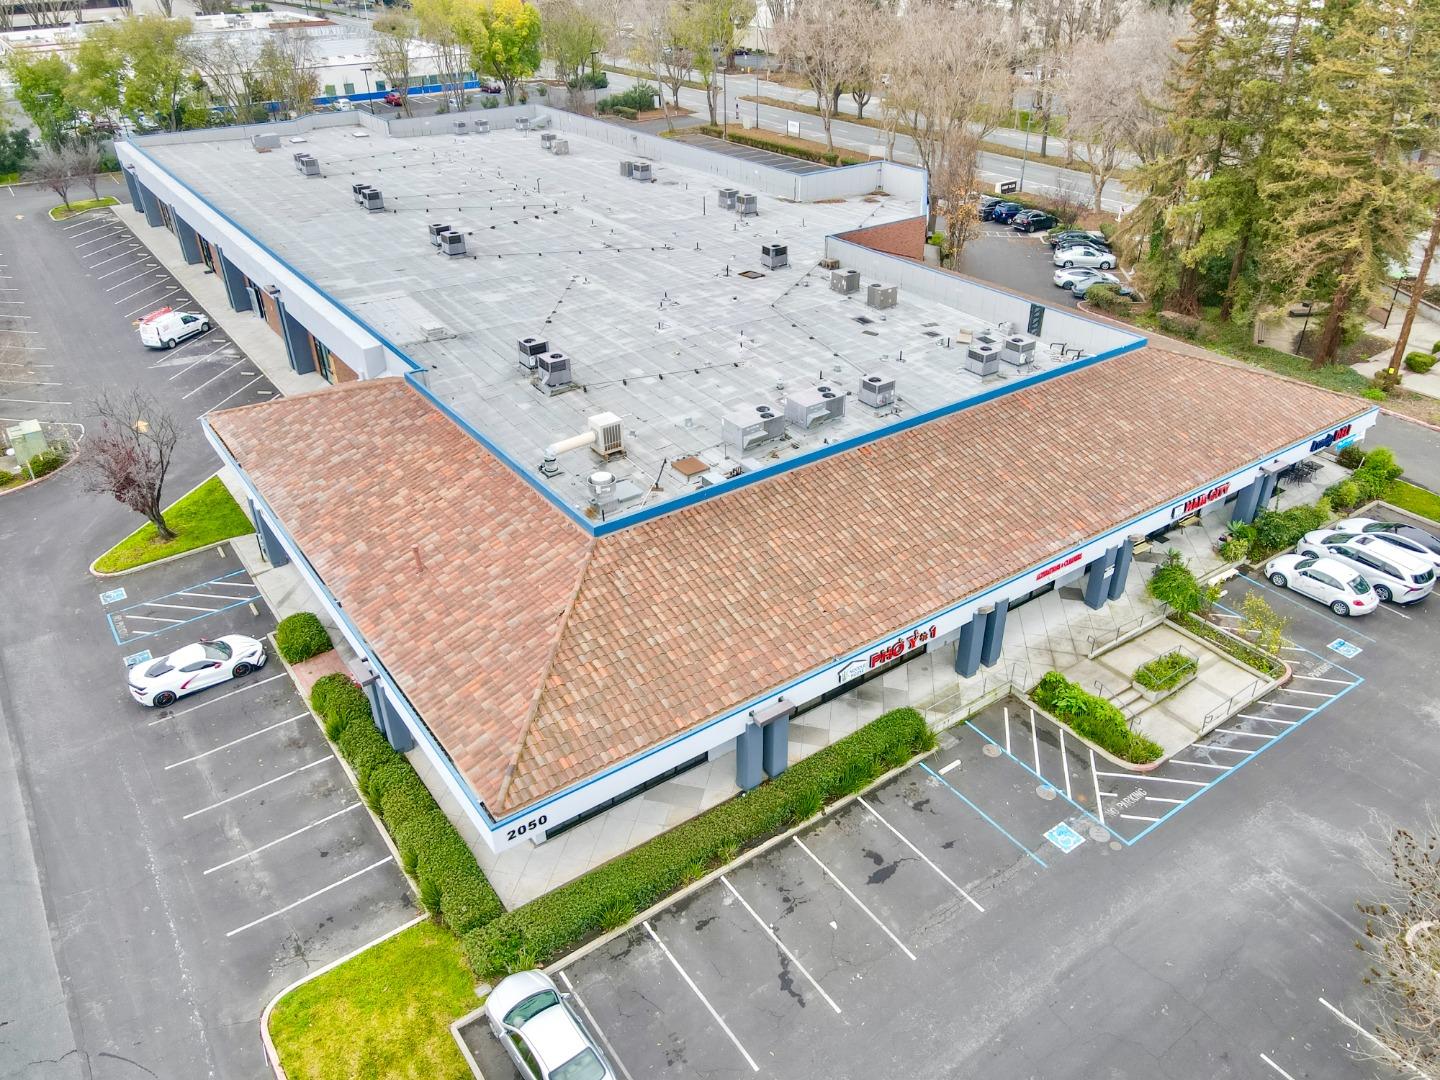 Photo of 2050 Concourse Dr #12 in San Jose, CA